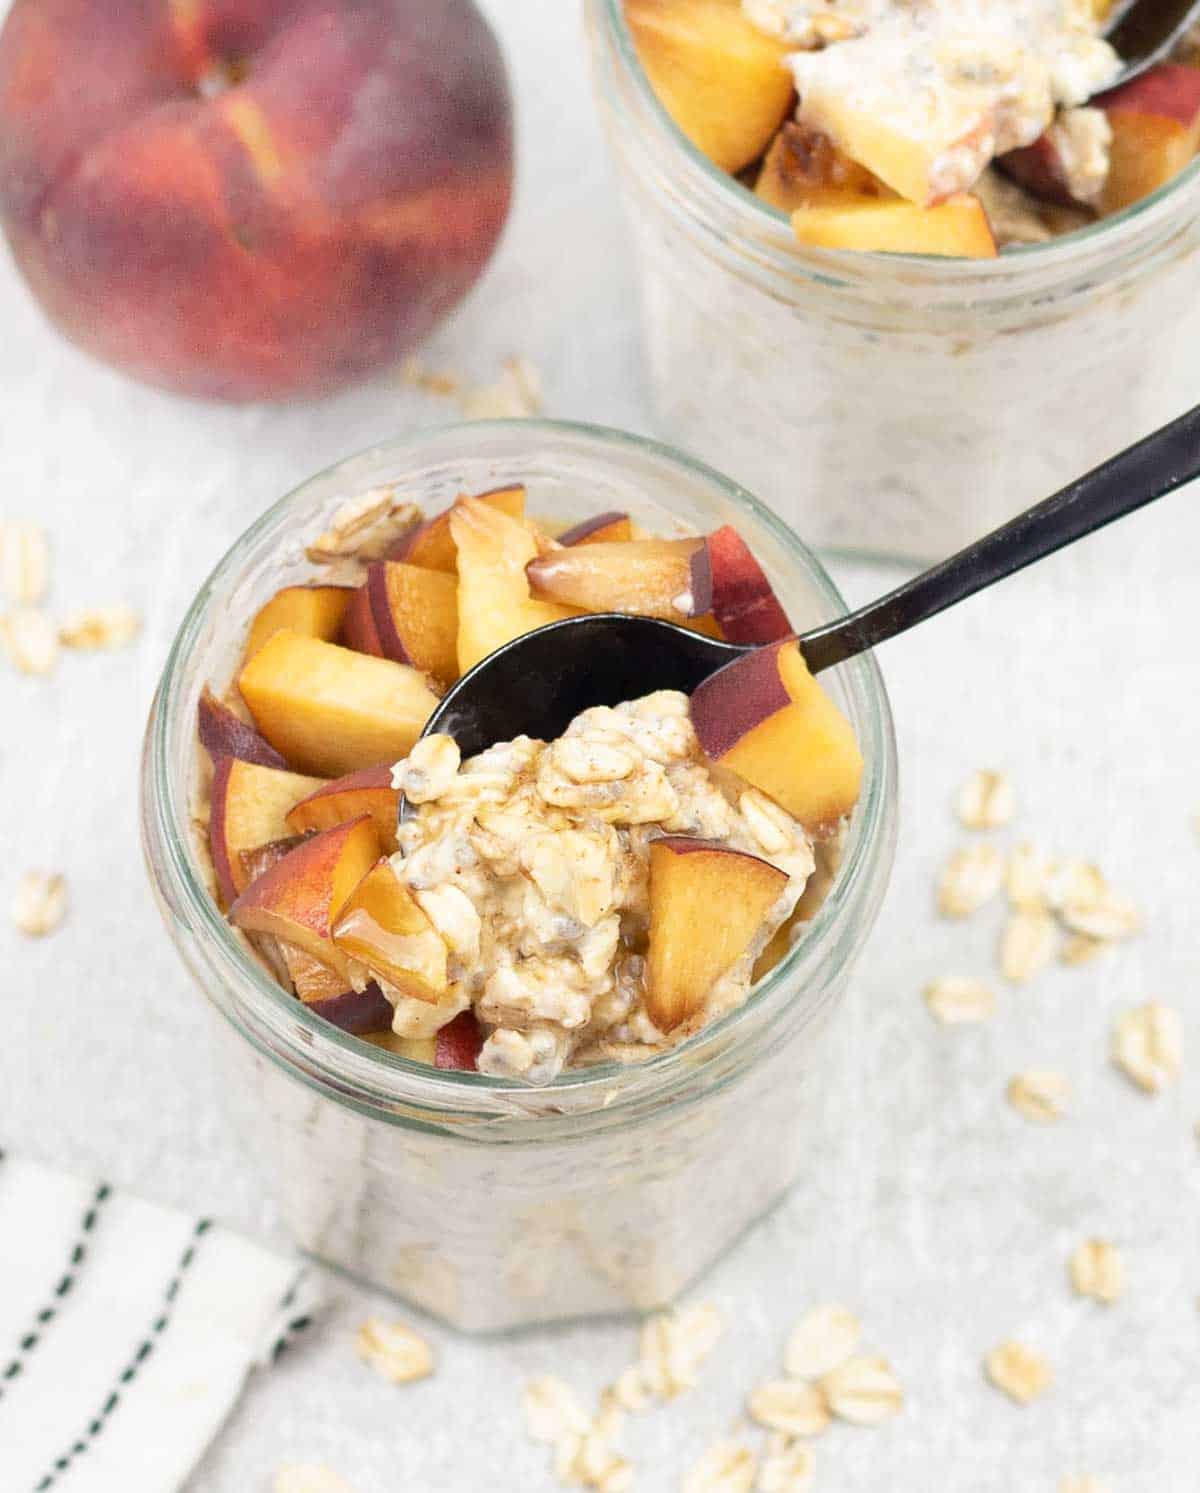 A spoonful of Peach overnight oats.